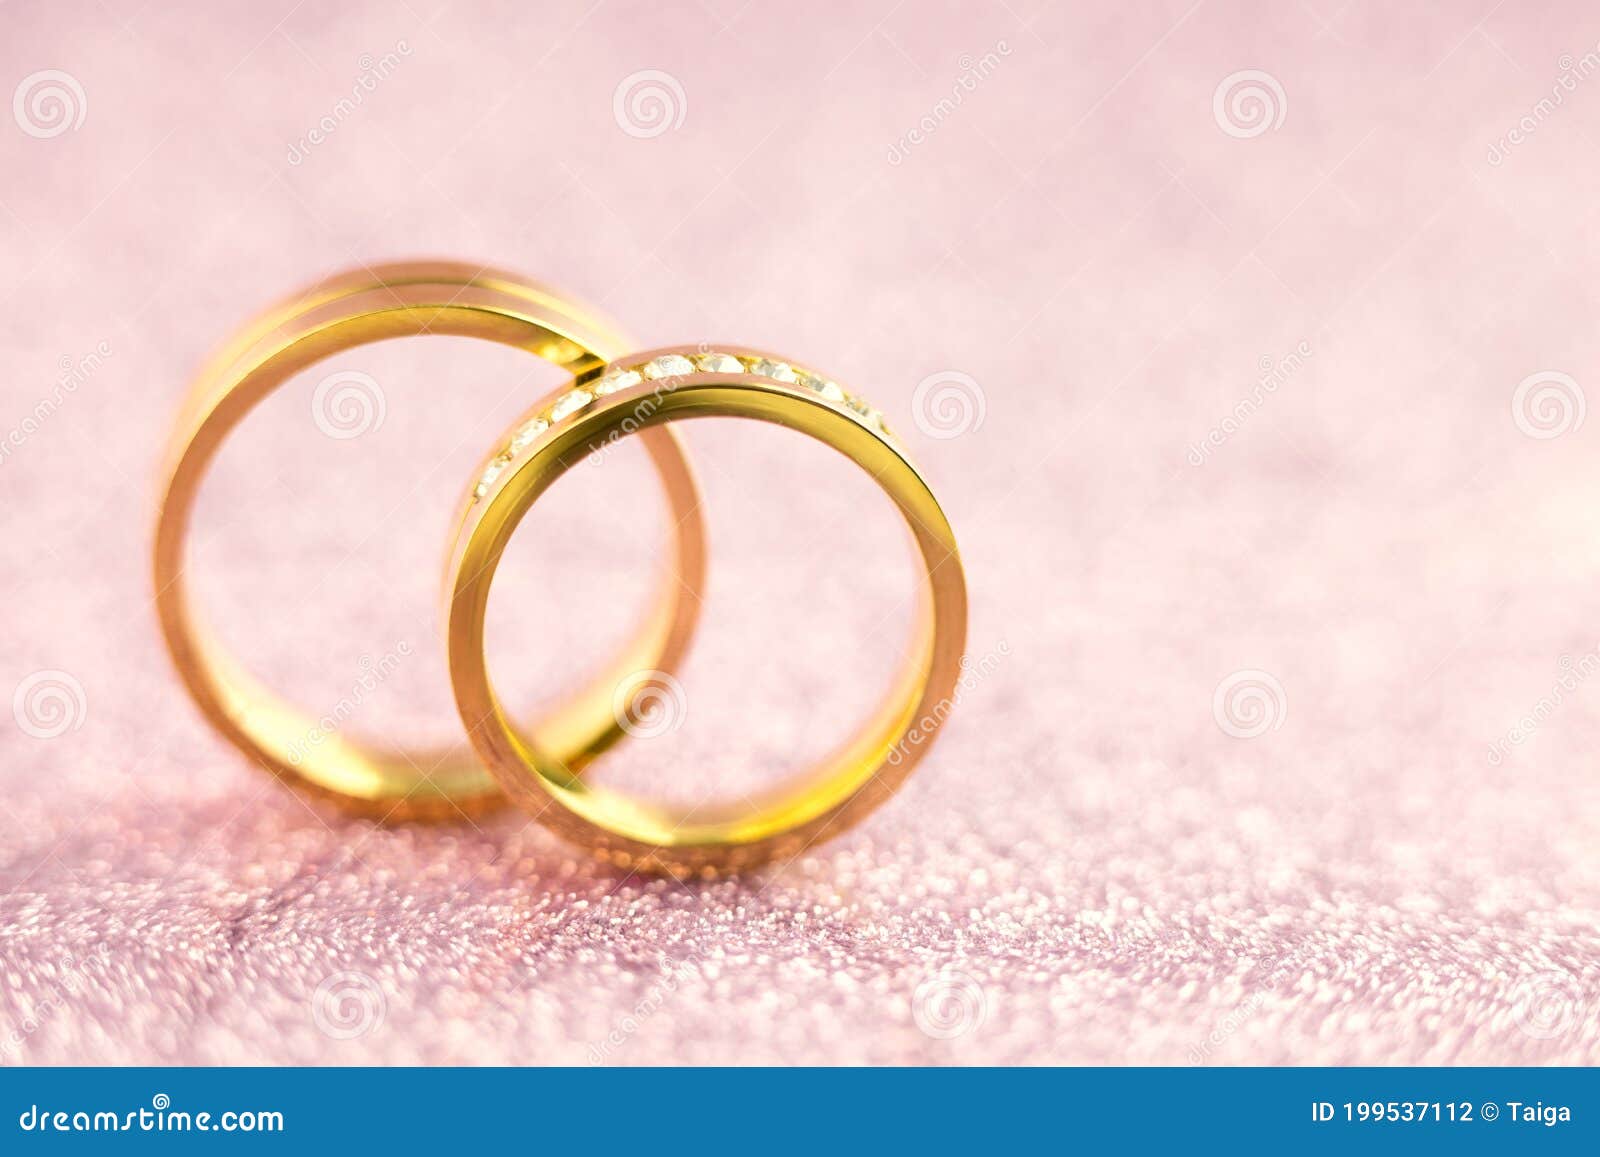 Wedding or Engagement Background - Pair of Golden Wedding Rings on Sparkle  Pink Backdrop Stock Photo - Image of marry, honeymoon: 199537112